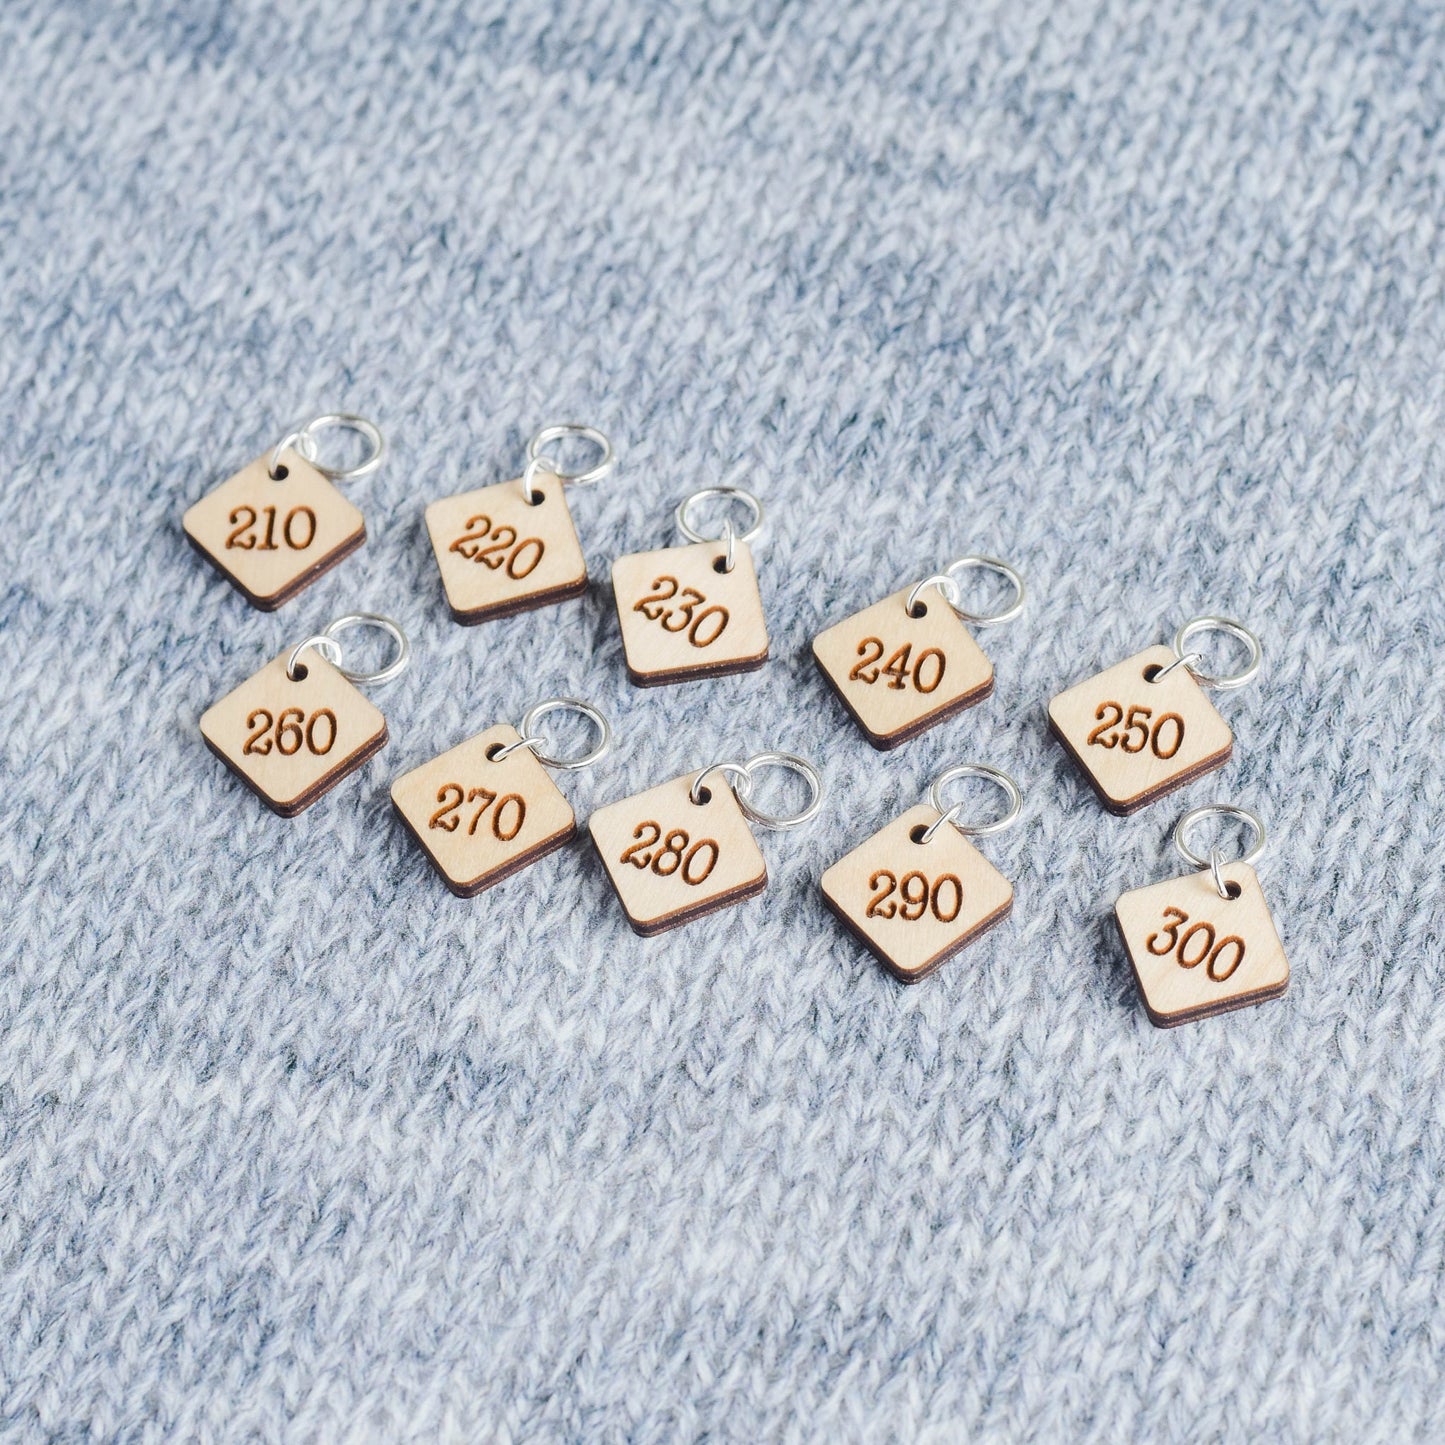 Set of 10 Stitch Markers - 210-300 - Cast On Counting Numbers, Laser Engraved Wood Stitch Markers, Counting Stitch Markers